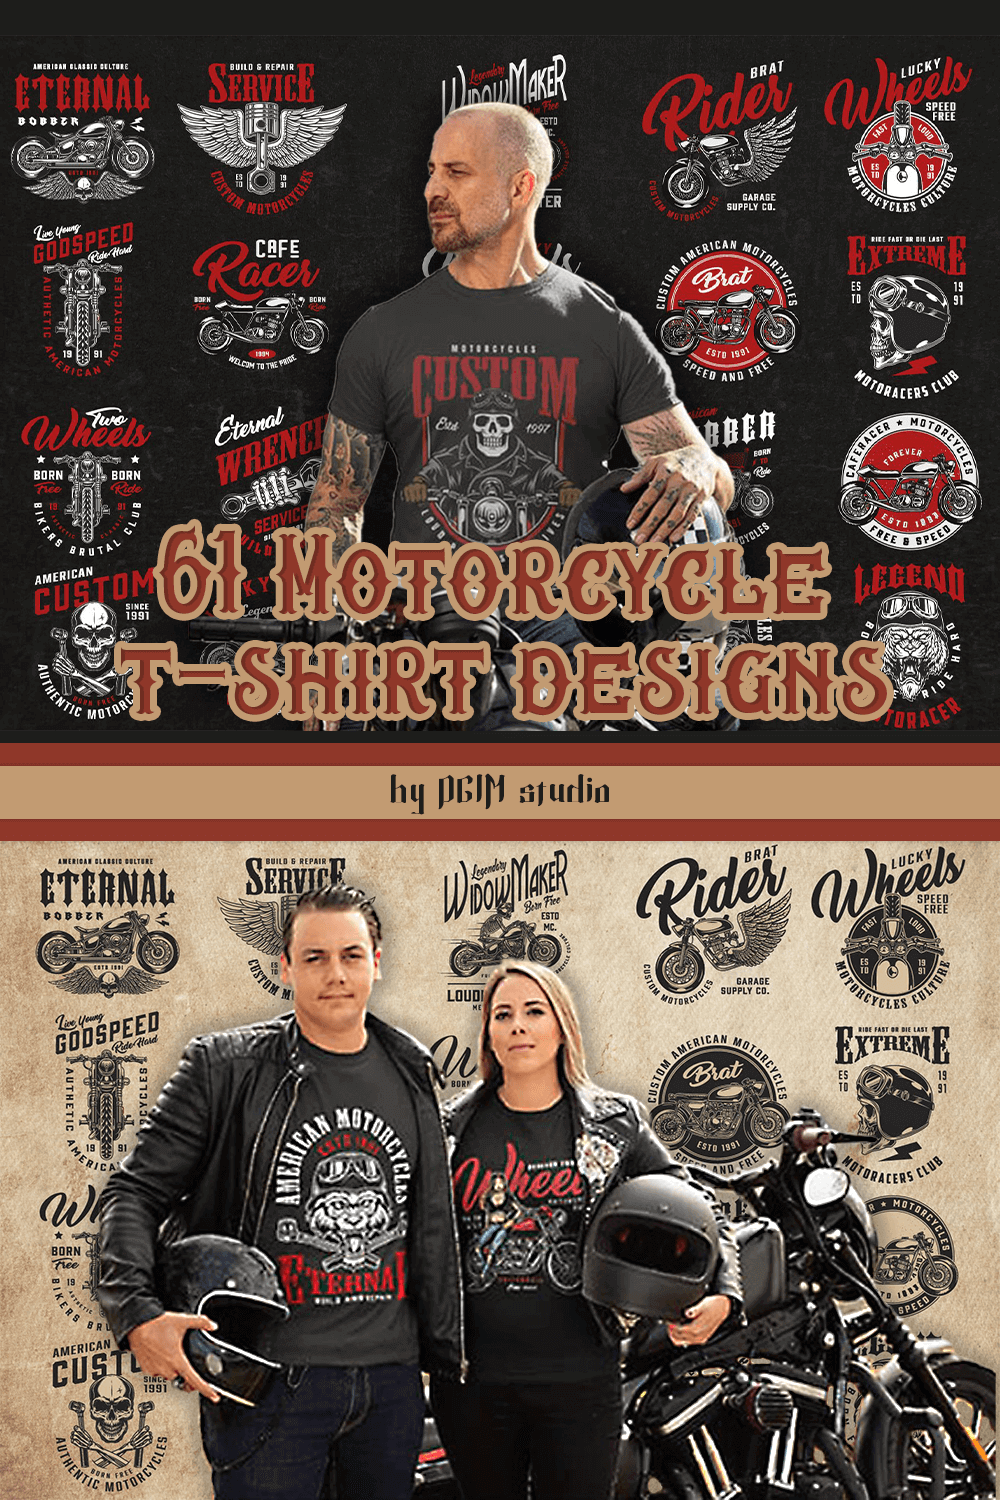 Motorcycle T-shirts on two guys and one girl.